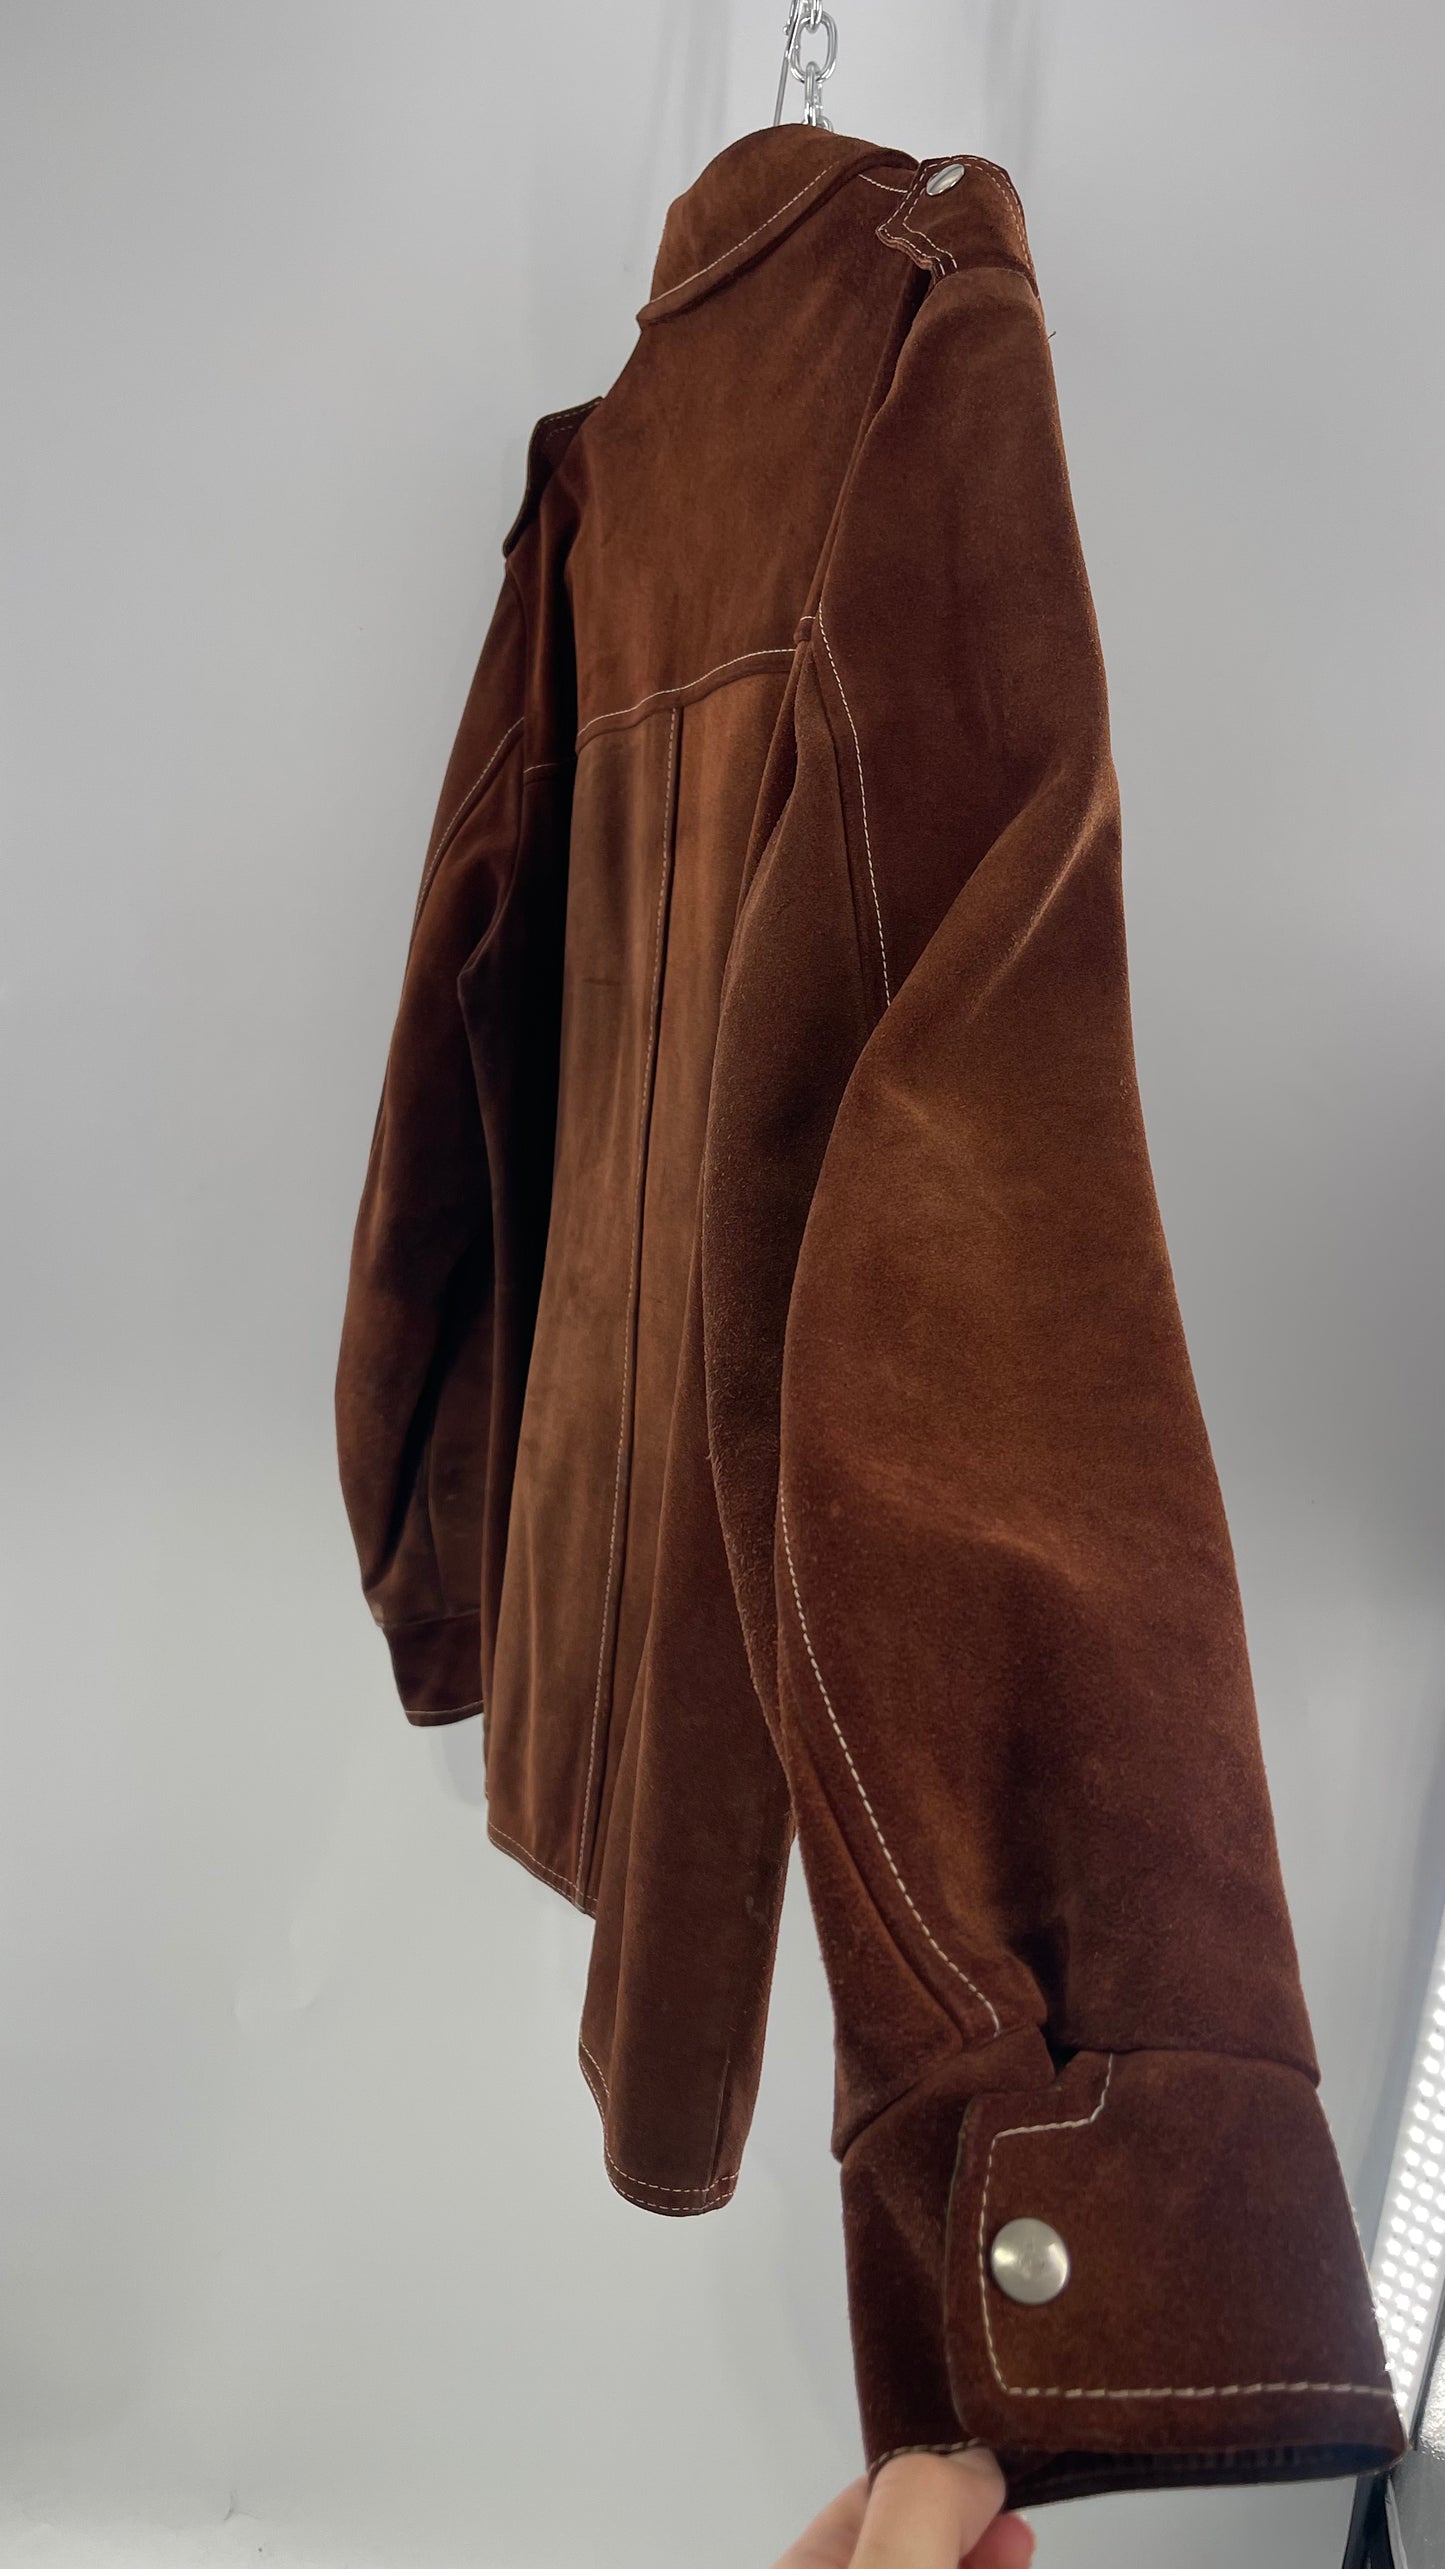 Vintage Brown Suede Jacket with Contrast White Stitching  (C)(Large)